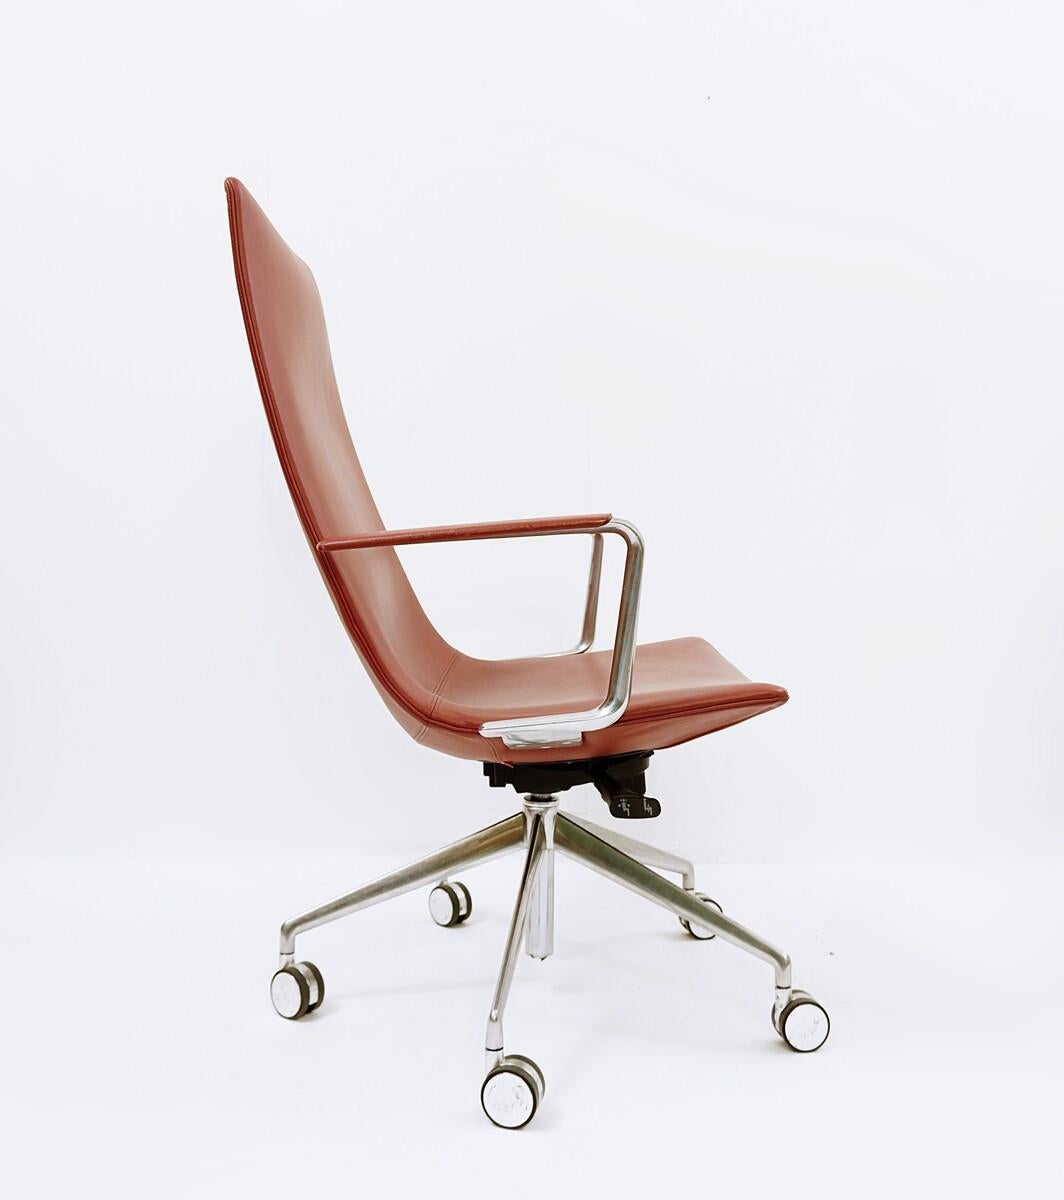 Office Chairs by Lievore, Altherr & Molina for arper - 2 available.